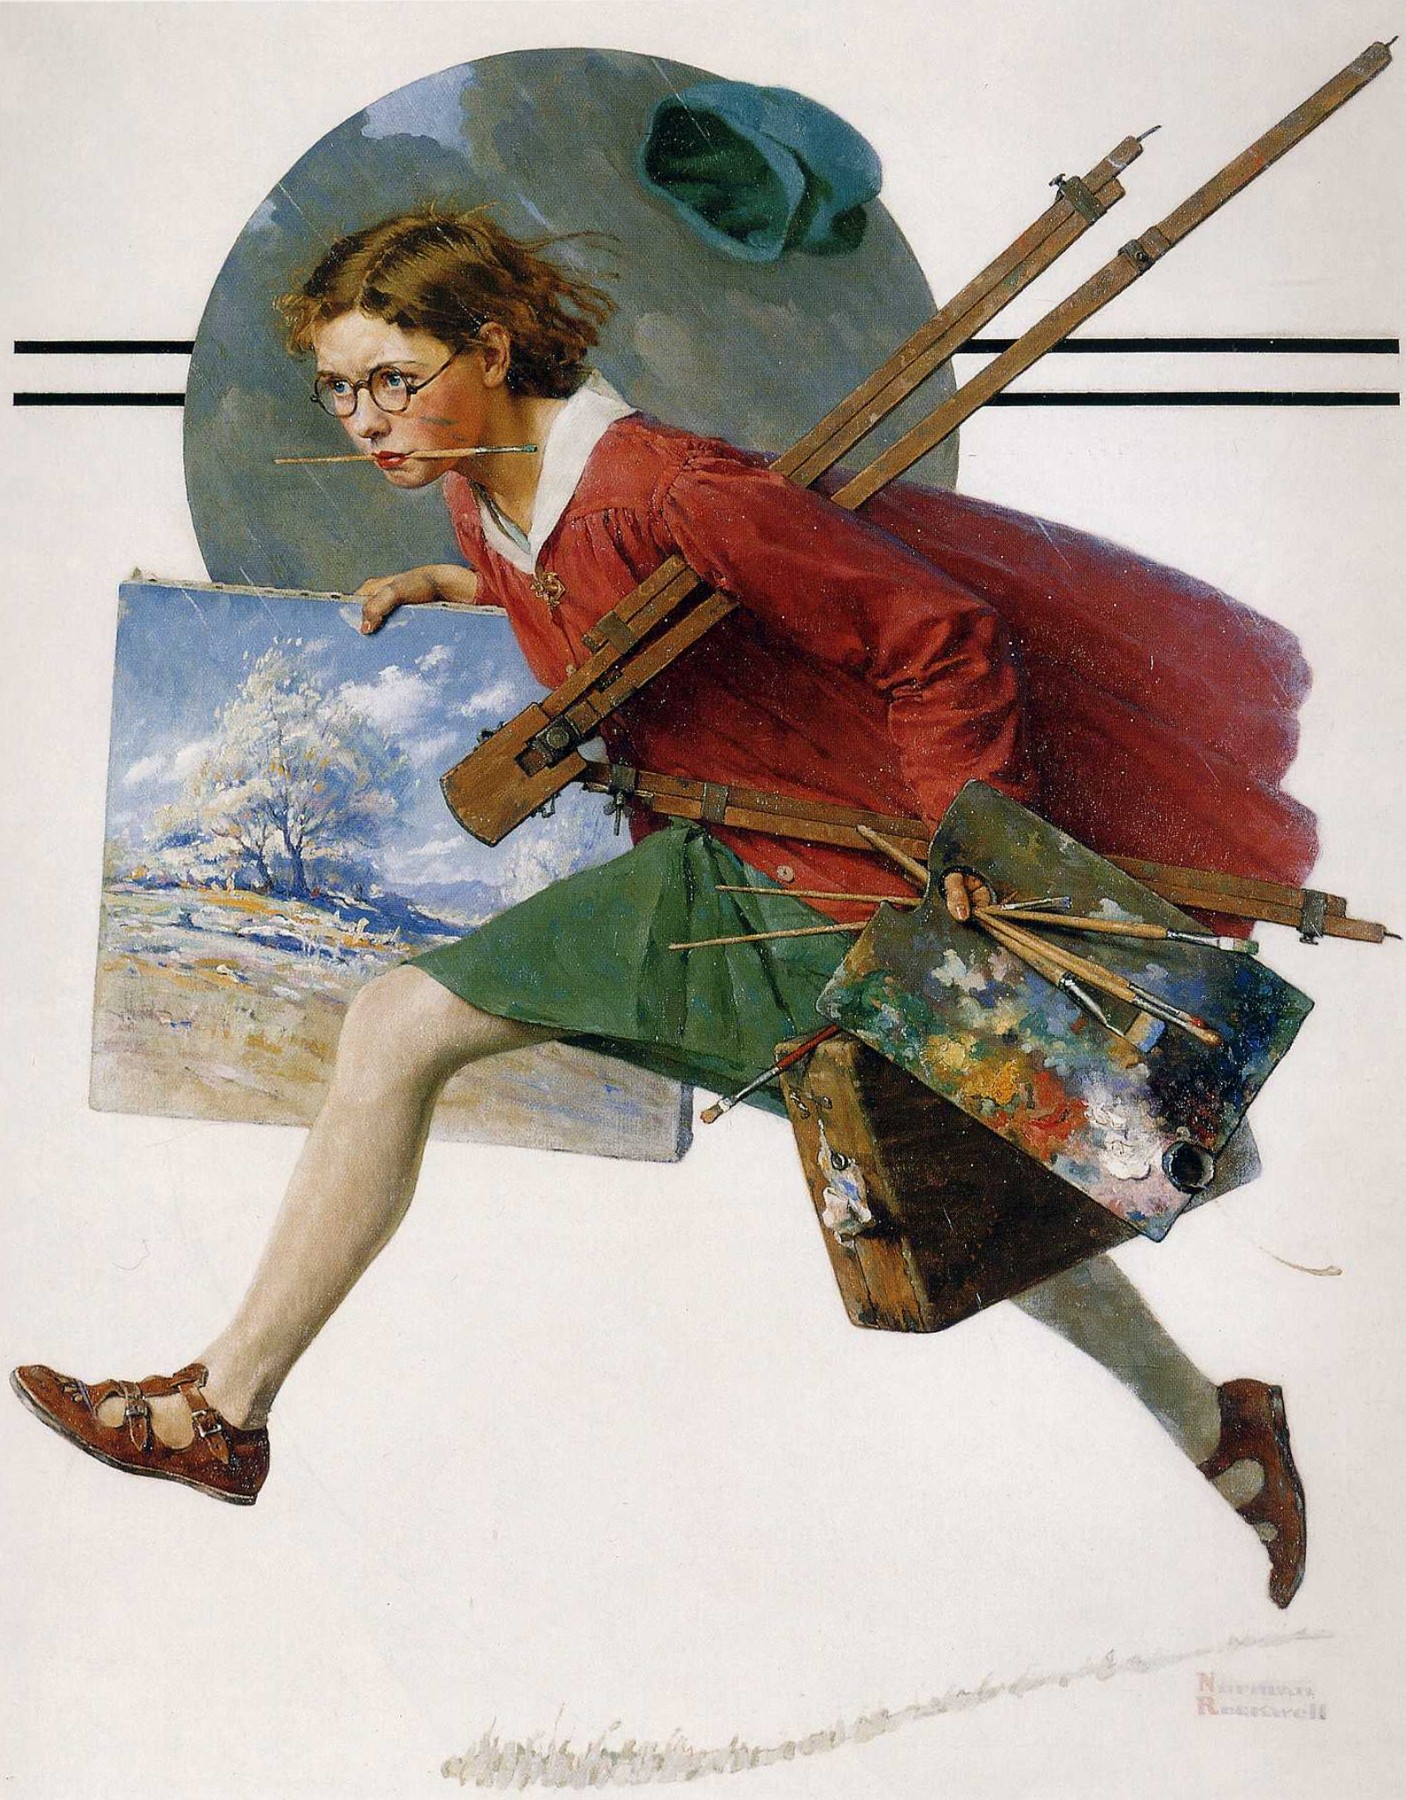 Girl Running with Wet Canvas, by Norman Rockwell